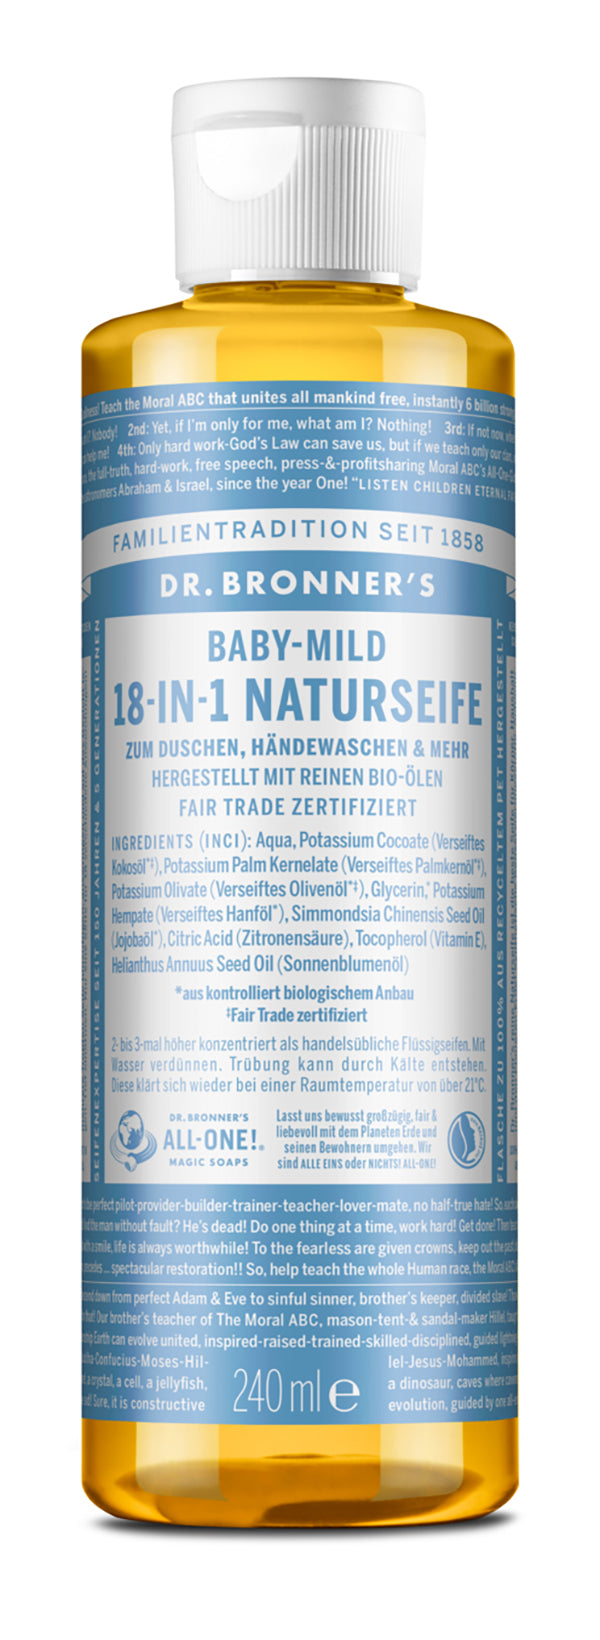 Dr. Bronner´s - 18-in-1 Naturseife Baby-Mild (ohne Duft) 240 ml